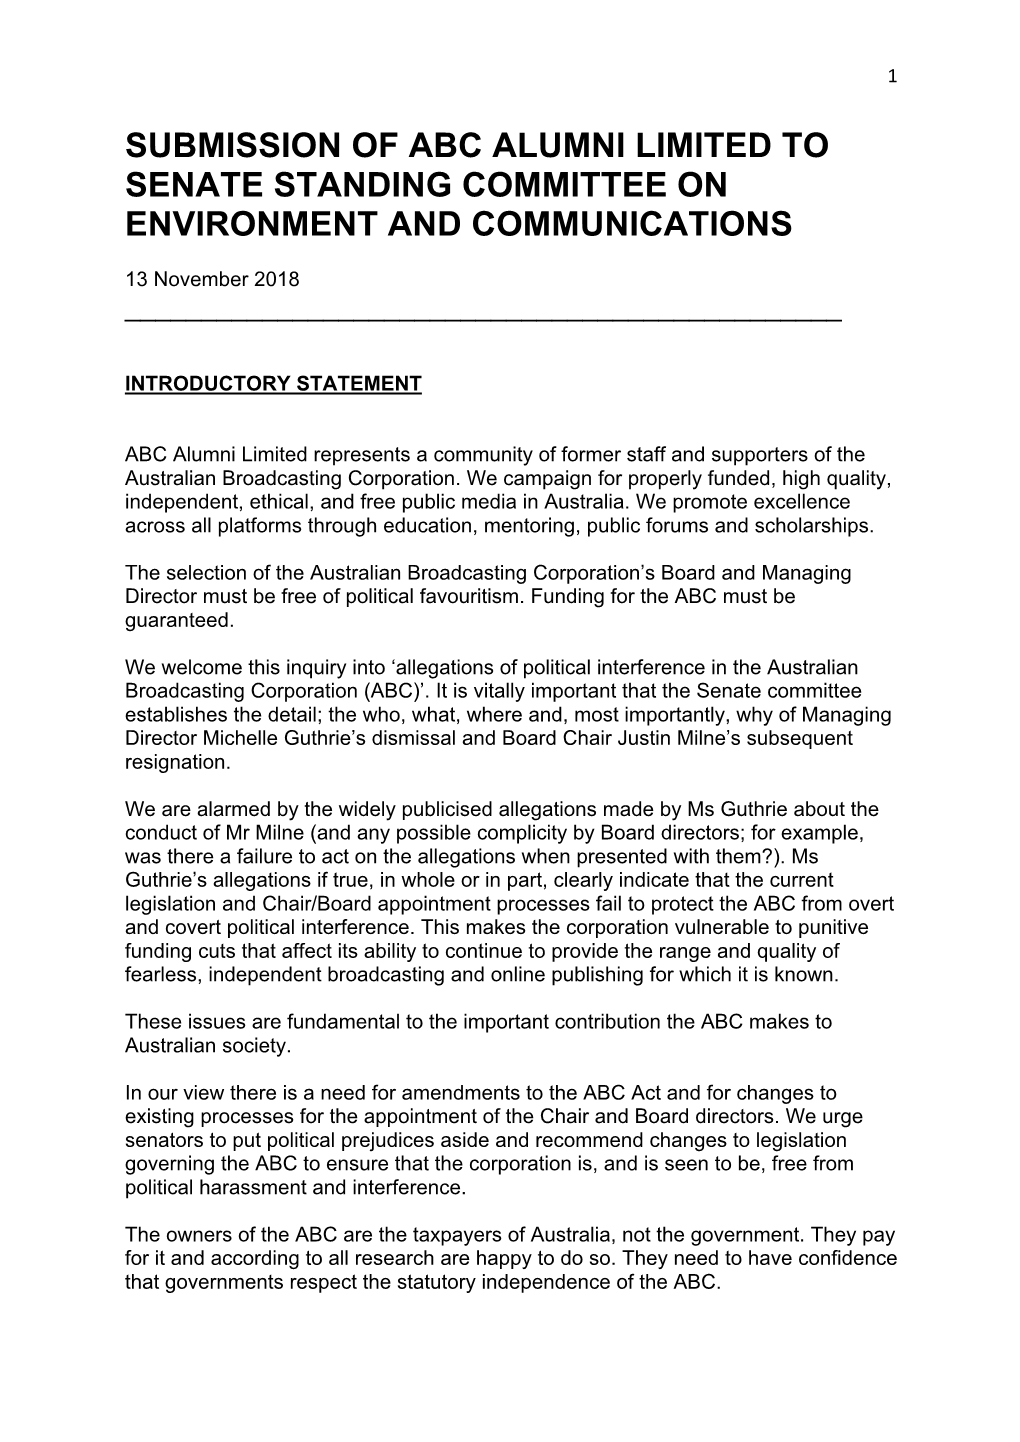 Submission of Abc Alumni Limited to Senate Standing Committee on Environment and Communications